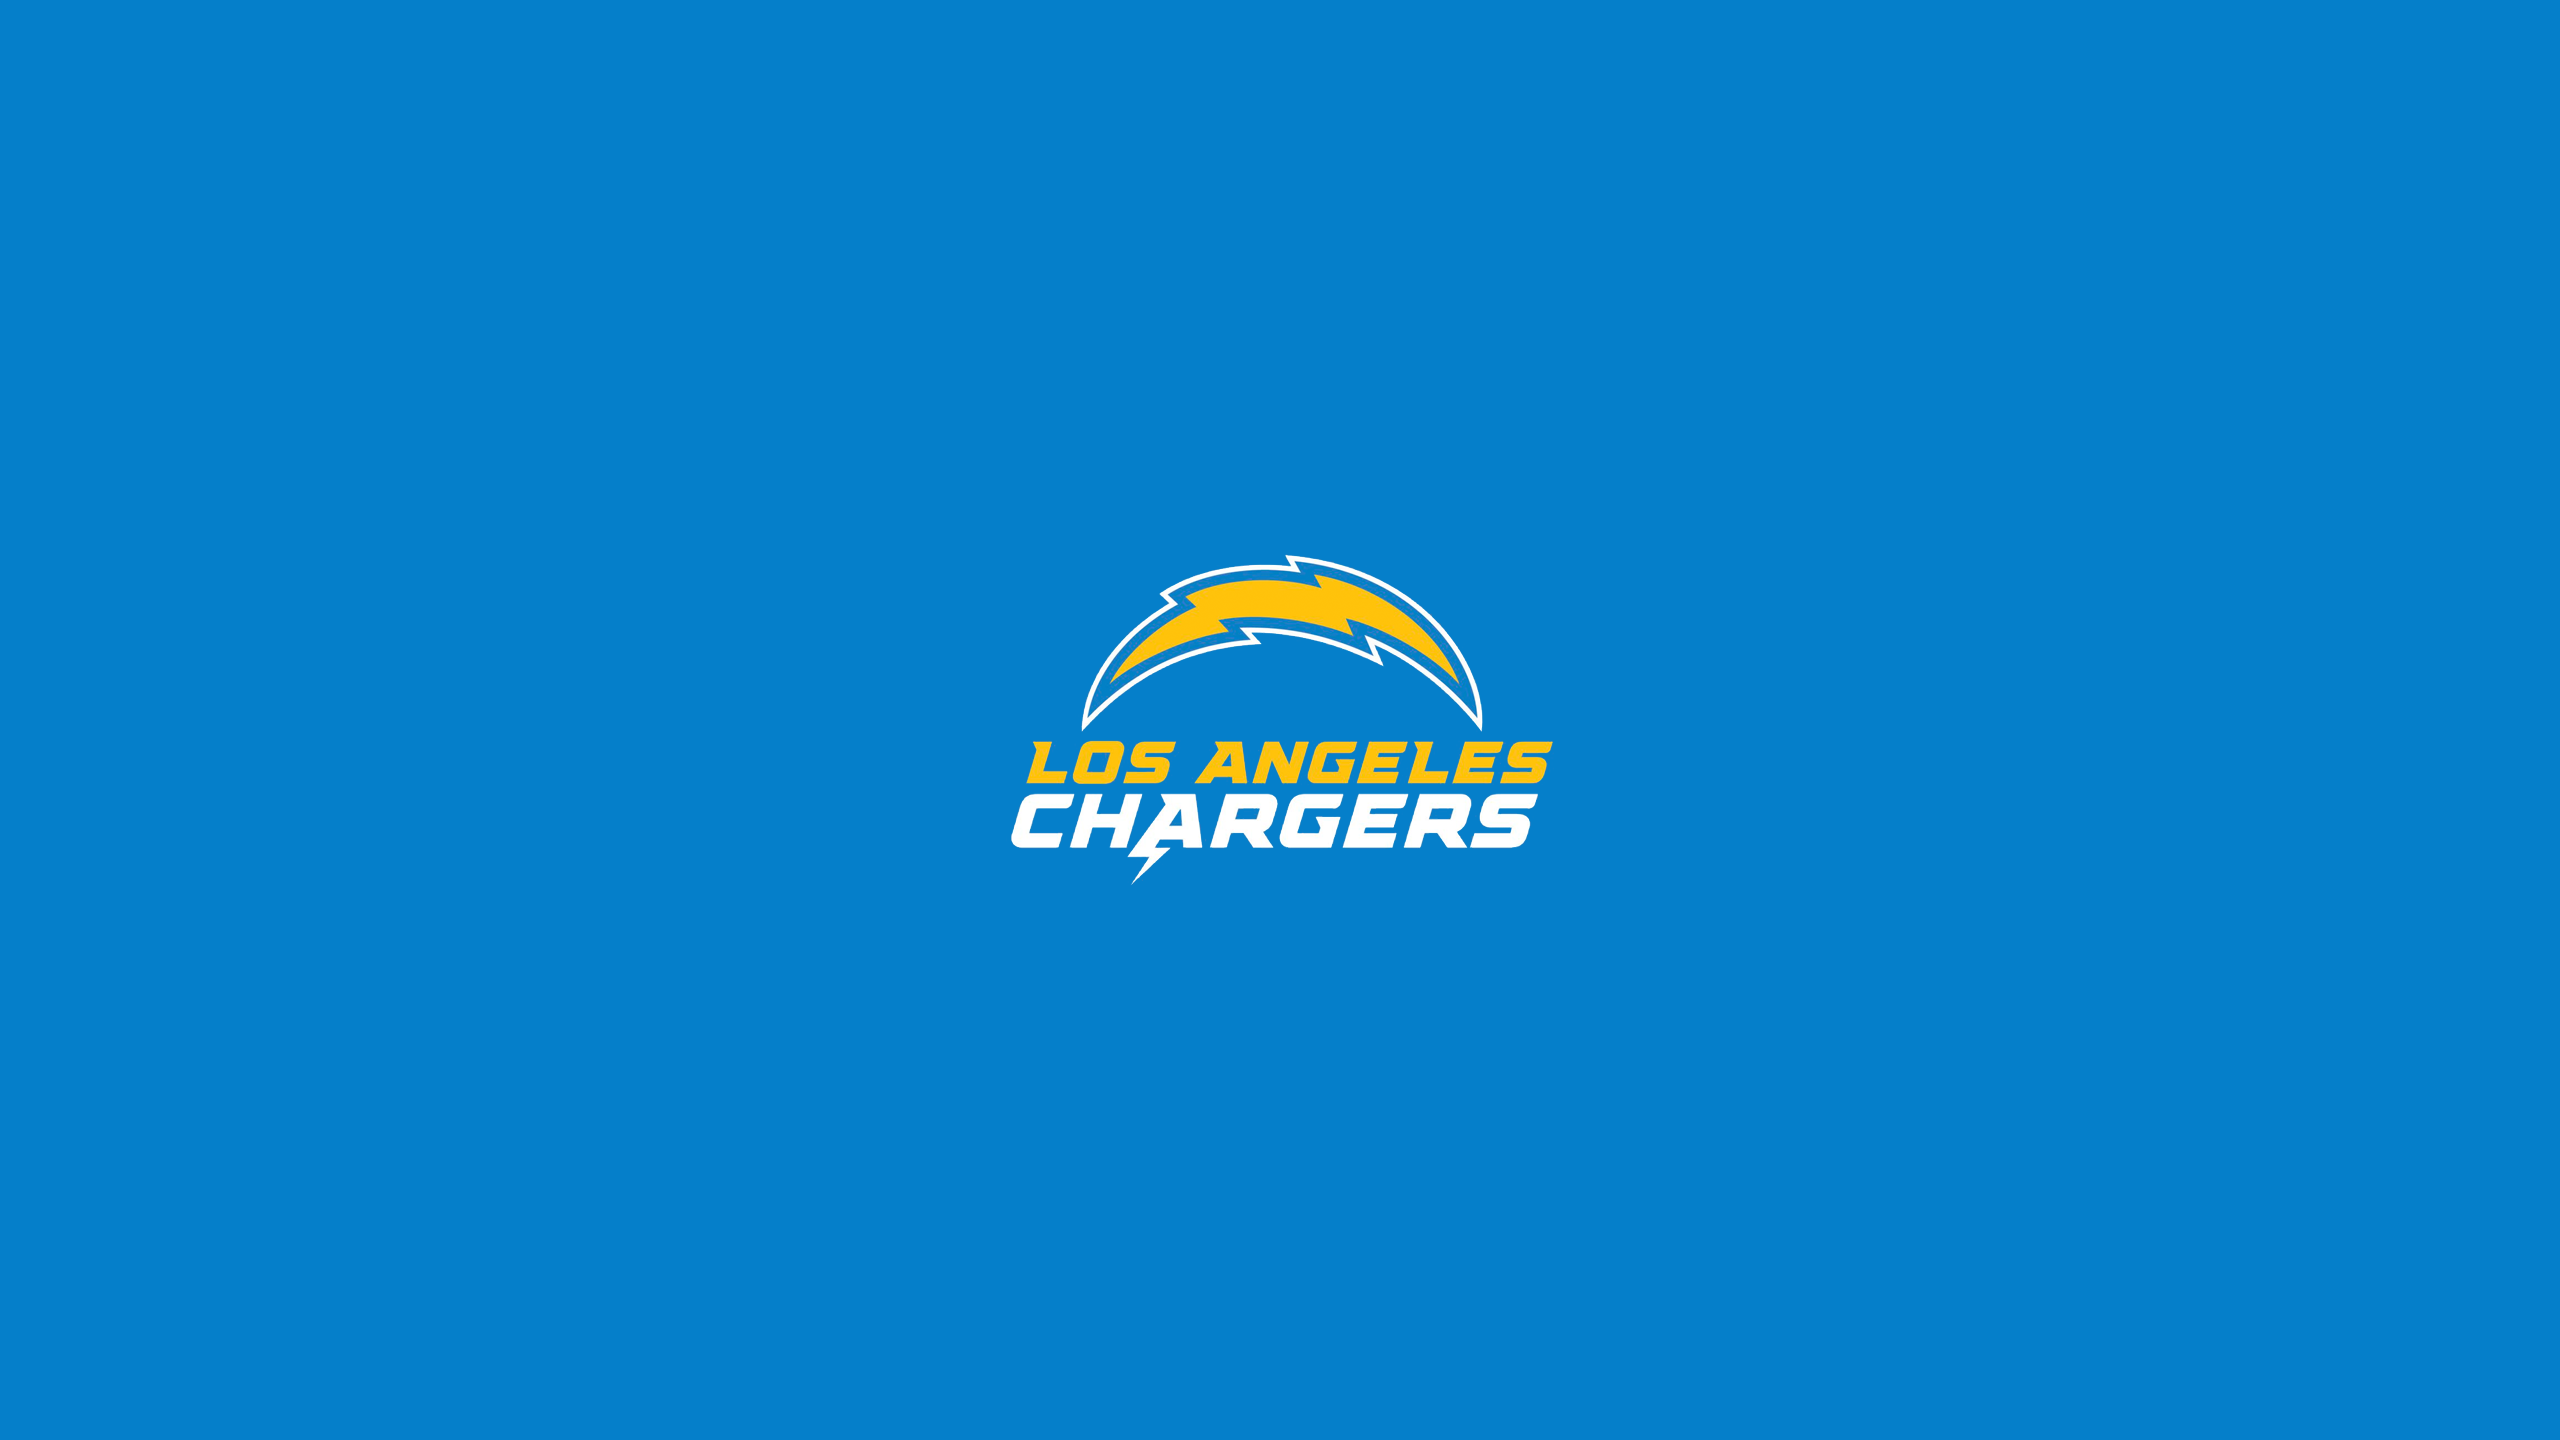 Los Angeles Chargers - NFL - Square Bettor